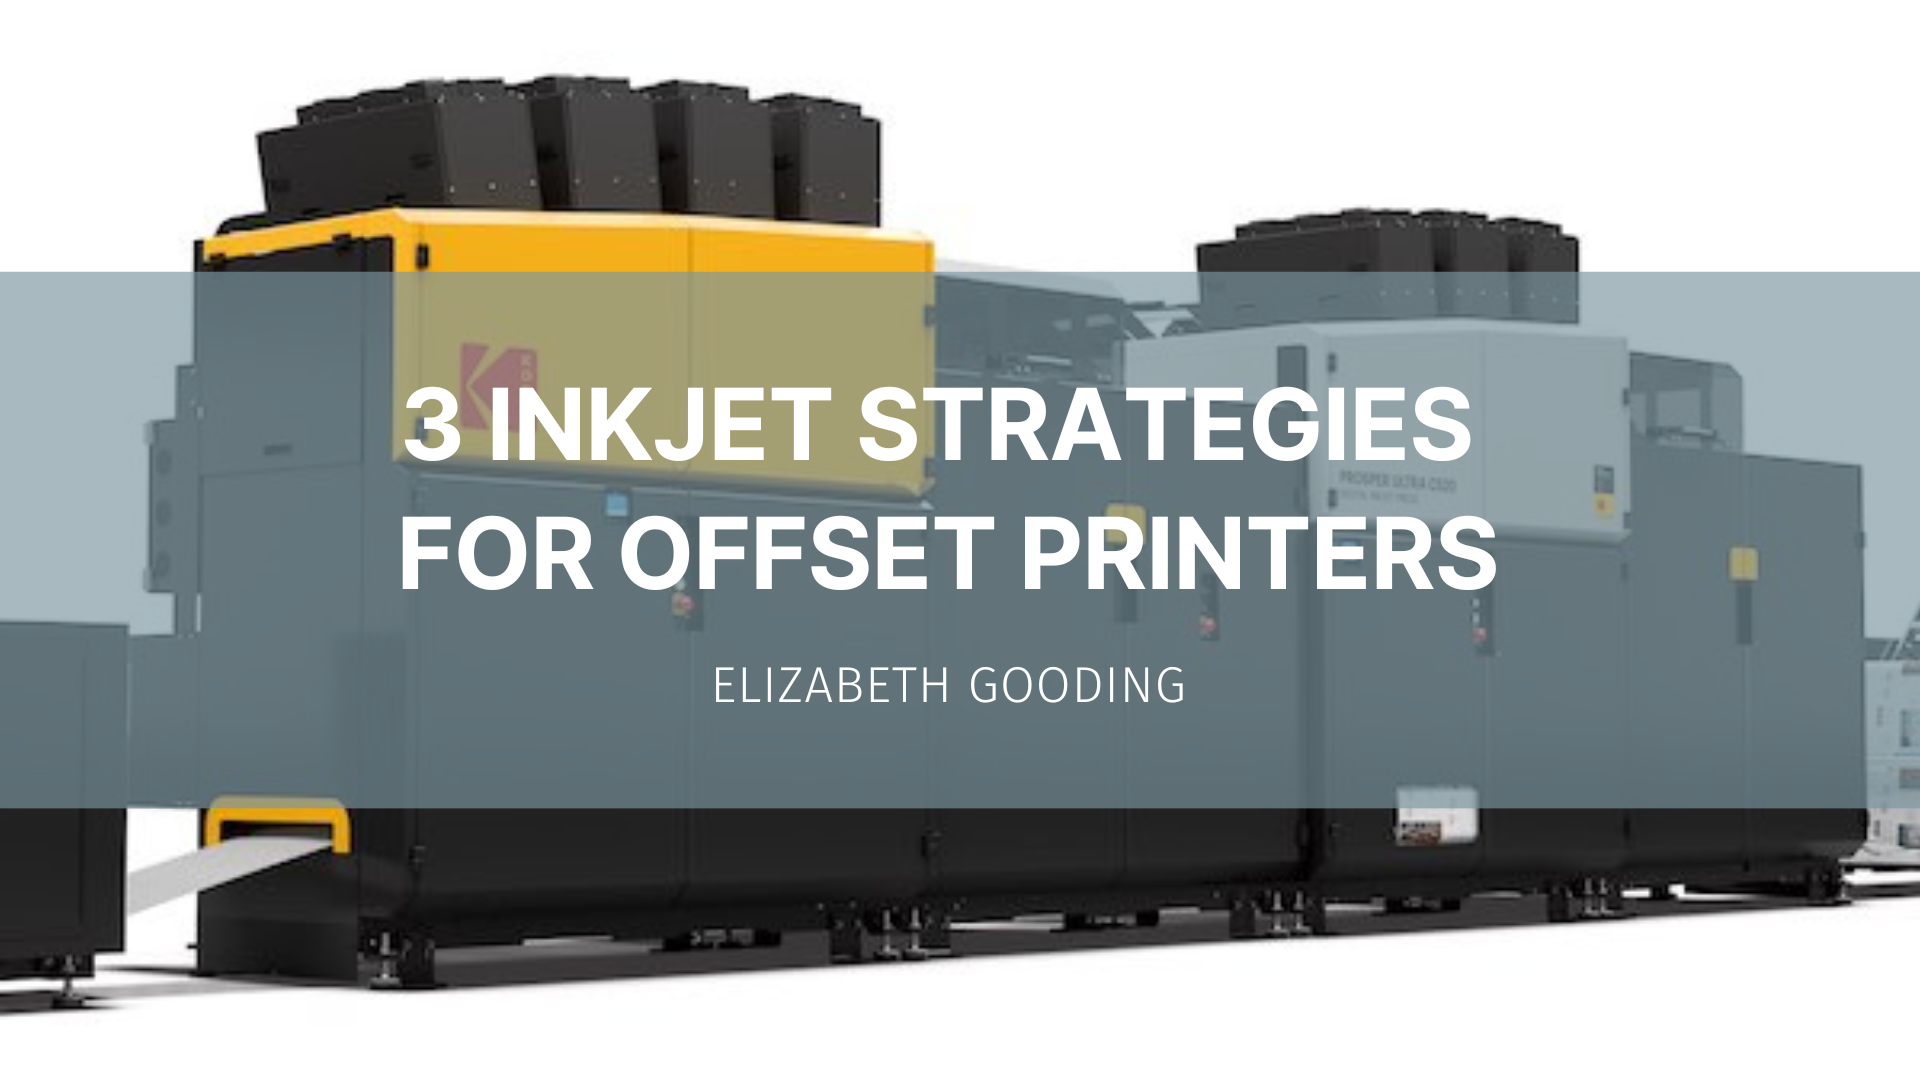 Featured image for “3 Inkjet Strategies for Offset Printers”